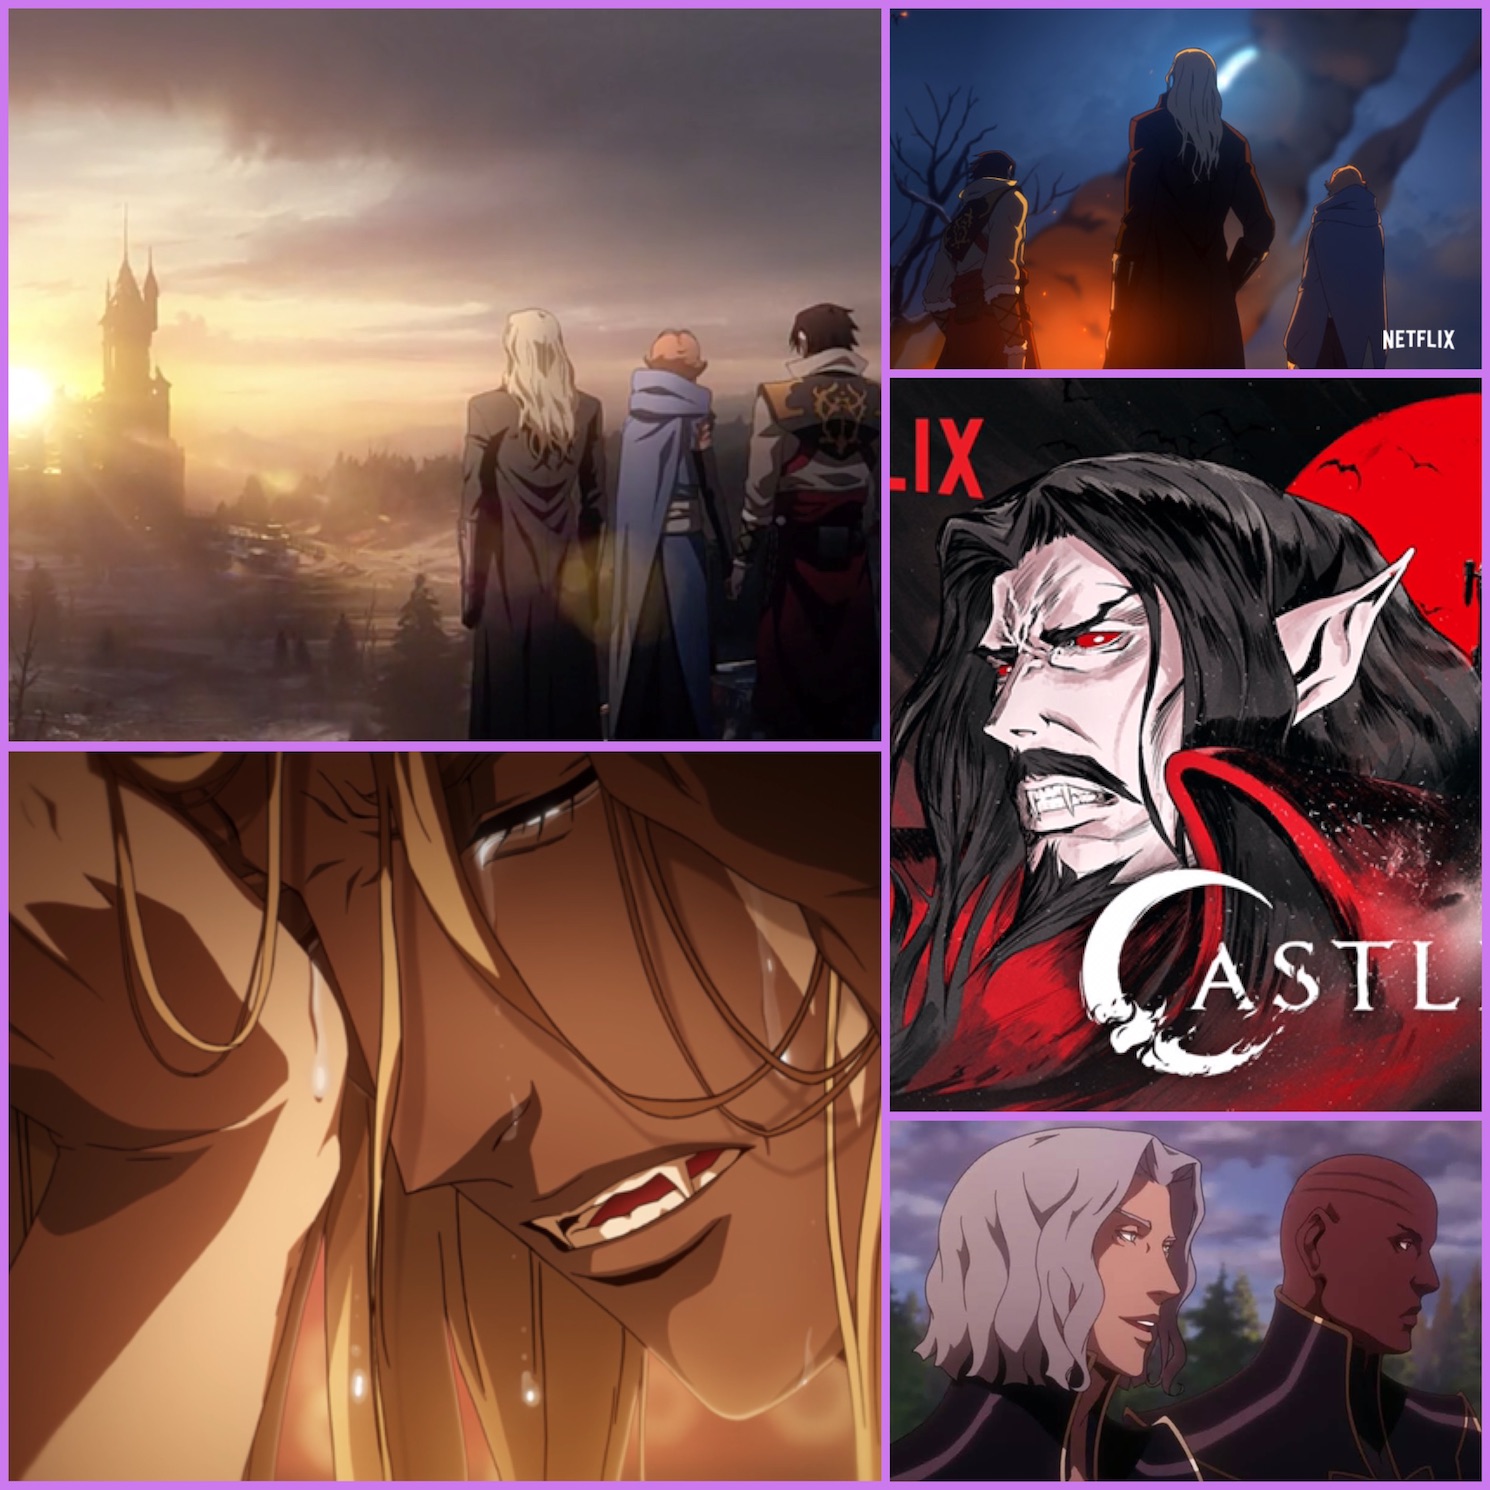 Insta Thoughts: Gaming / Cinema – Castlevania